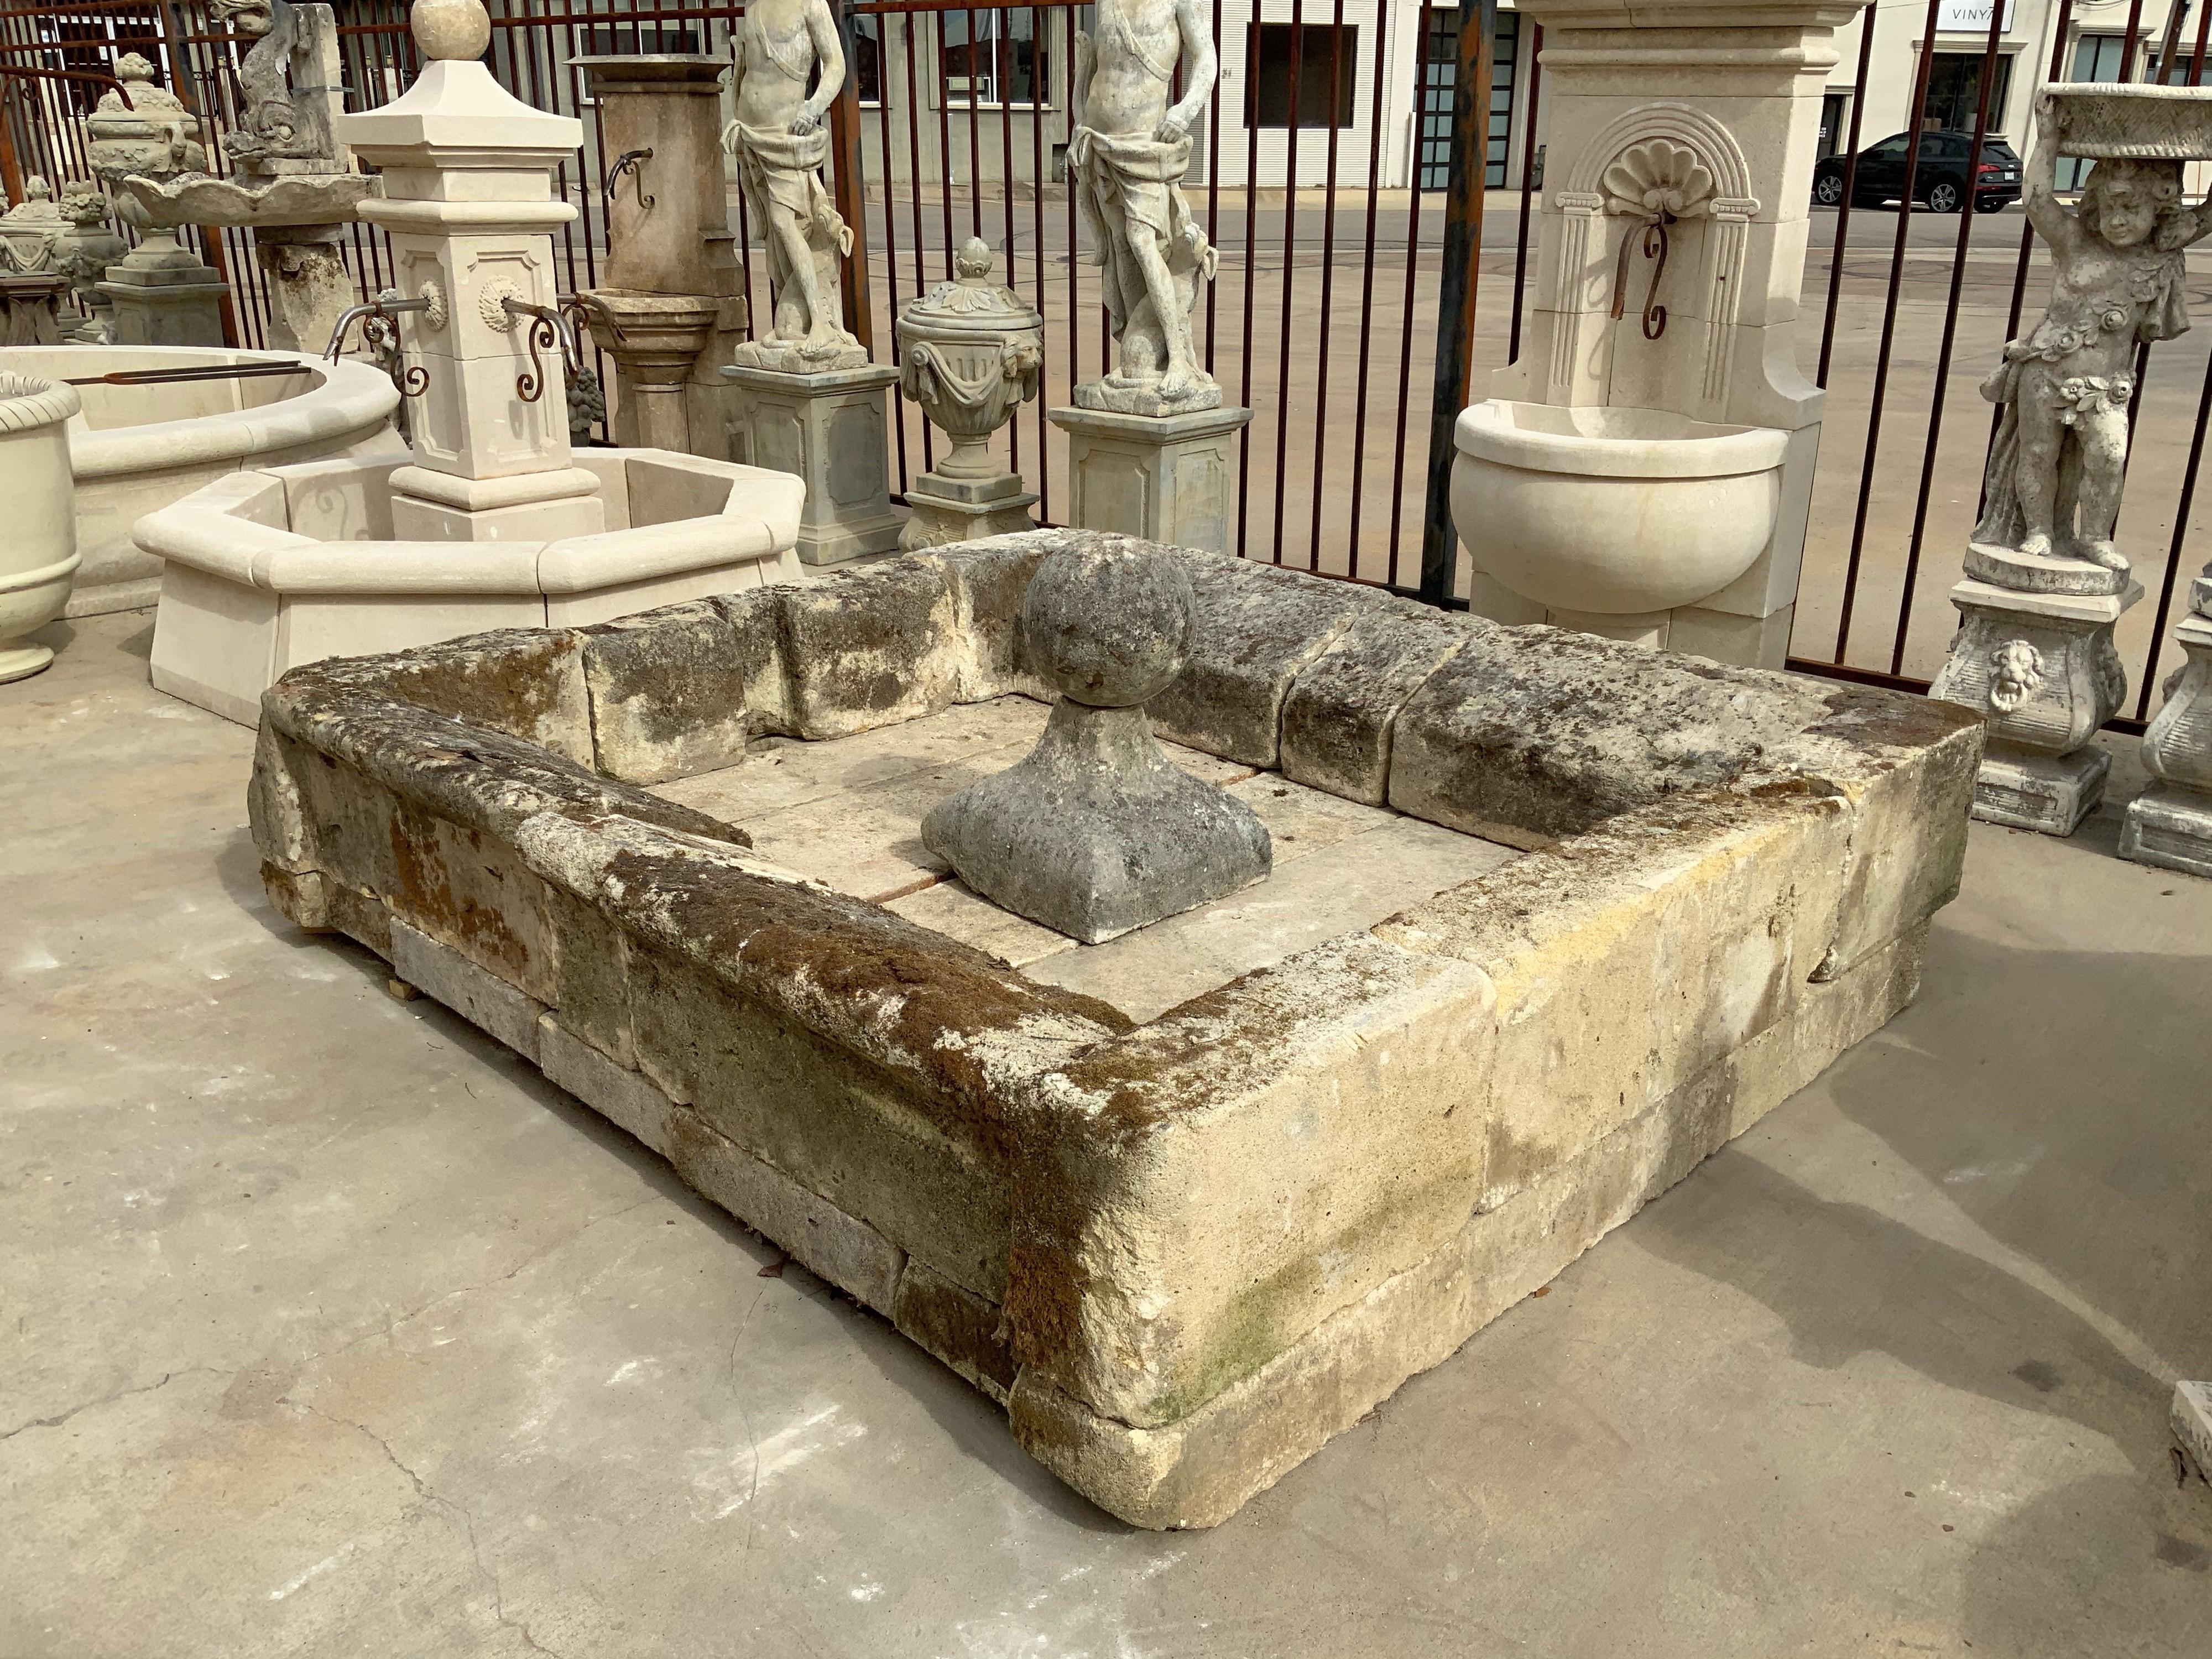 This limestone fountain origins from the Bordeaux Region in France, circa 1580.